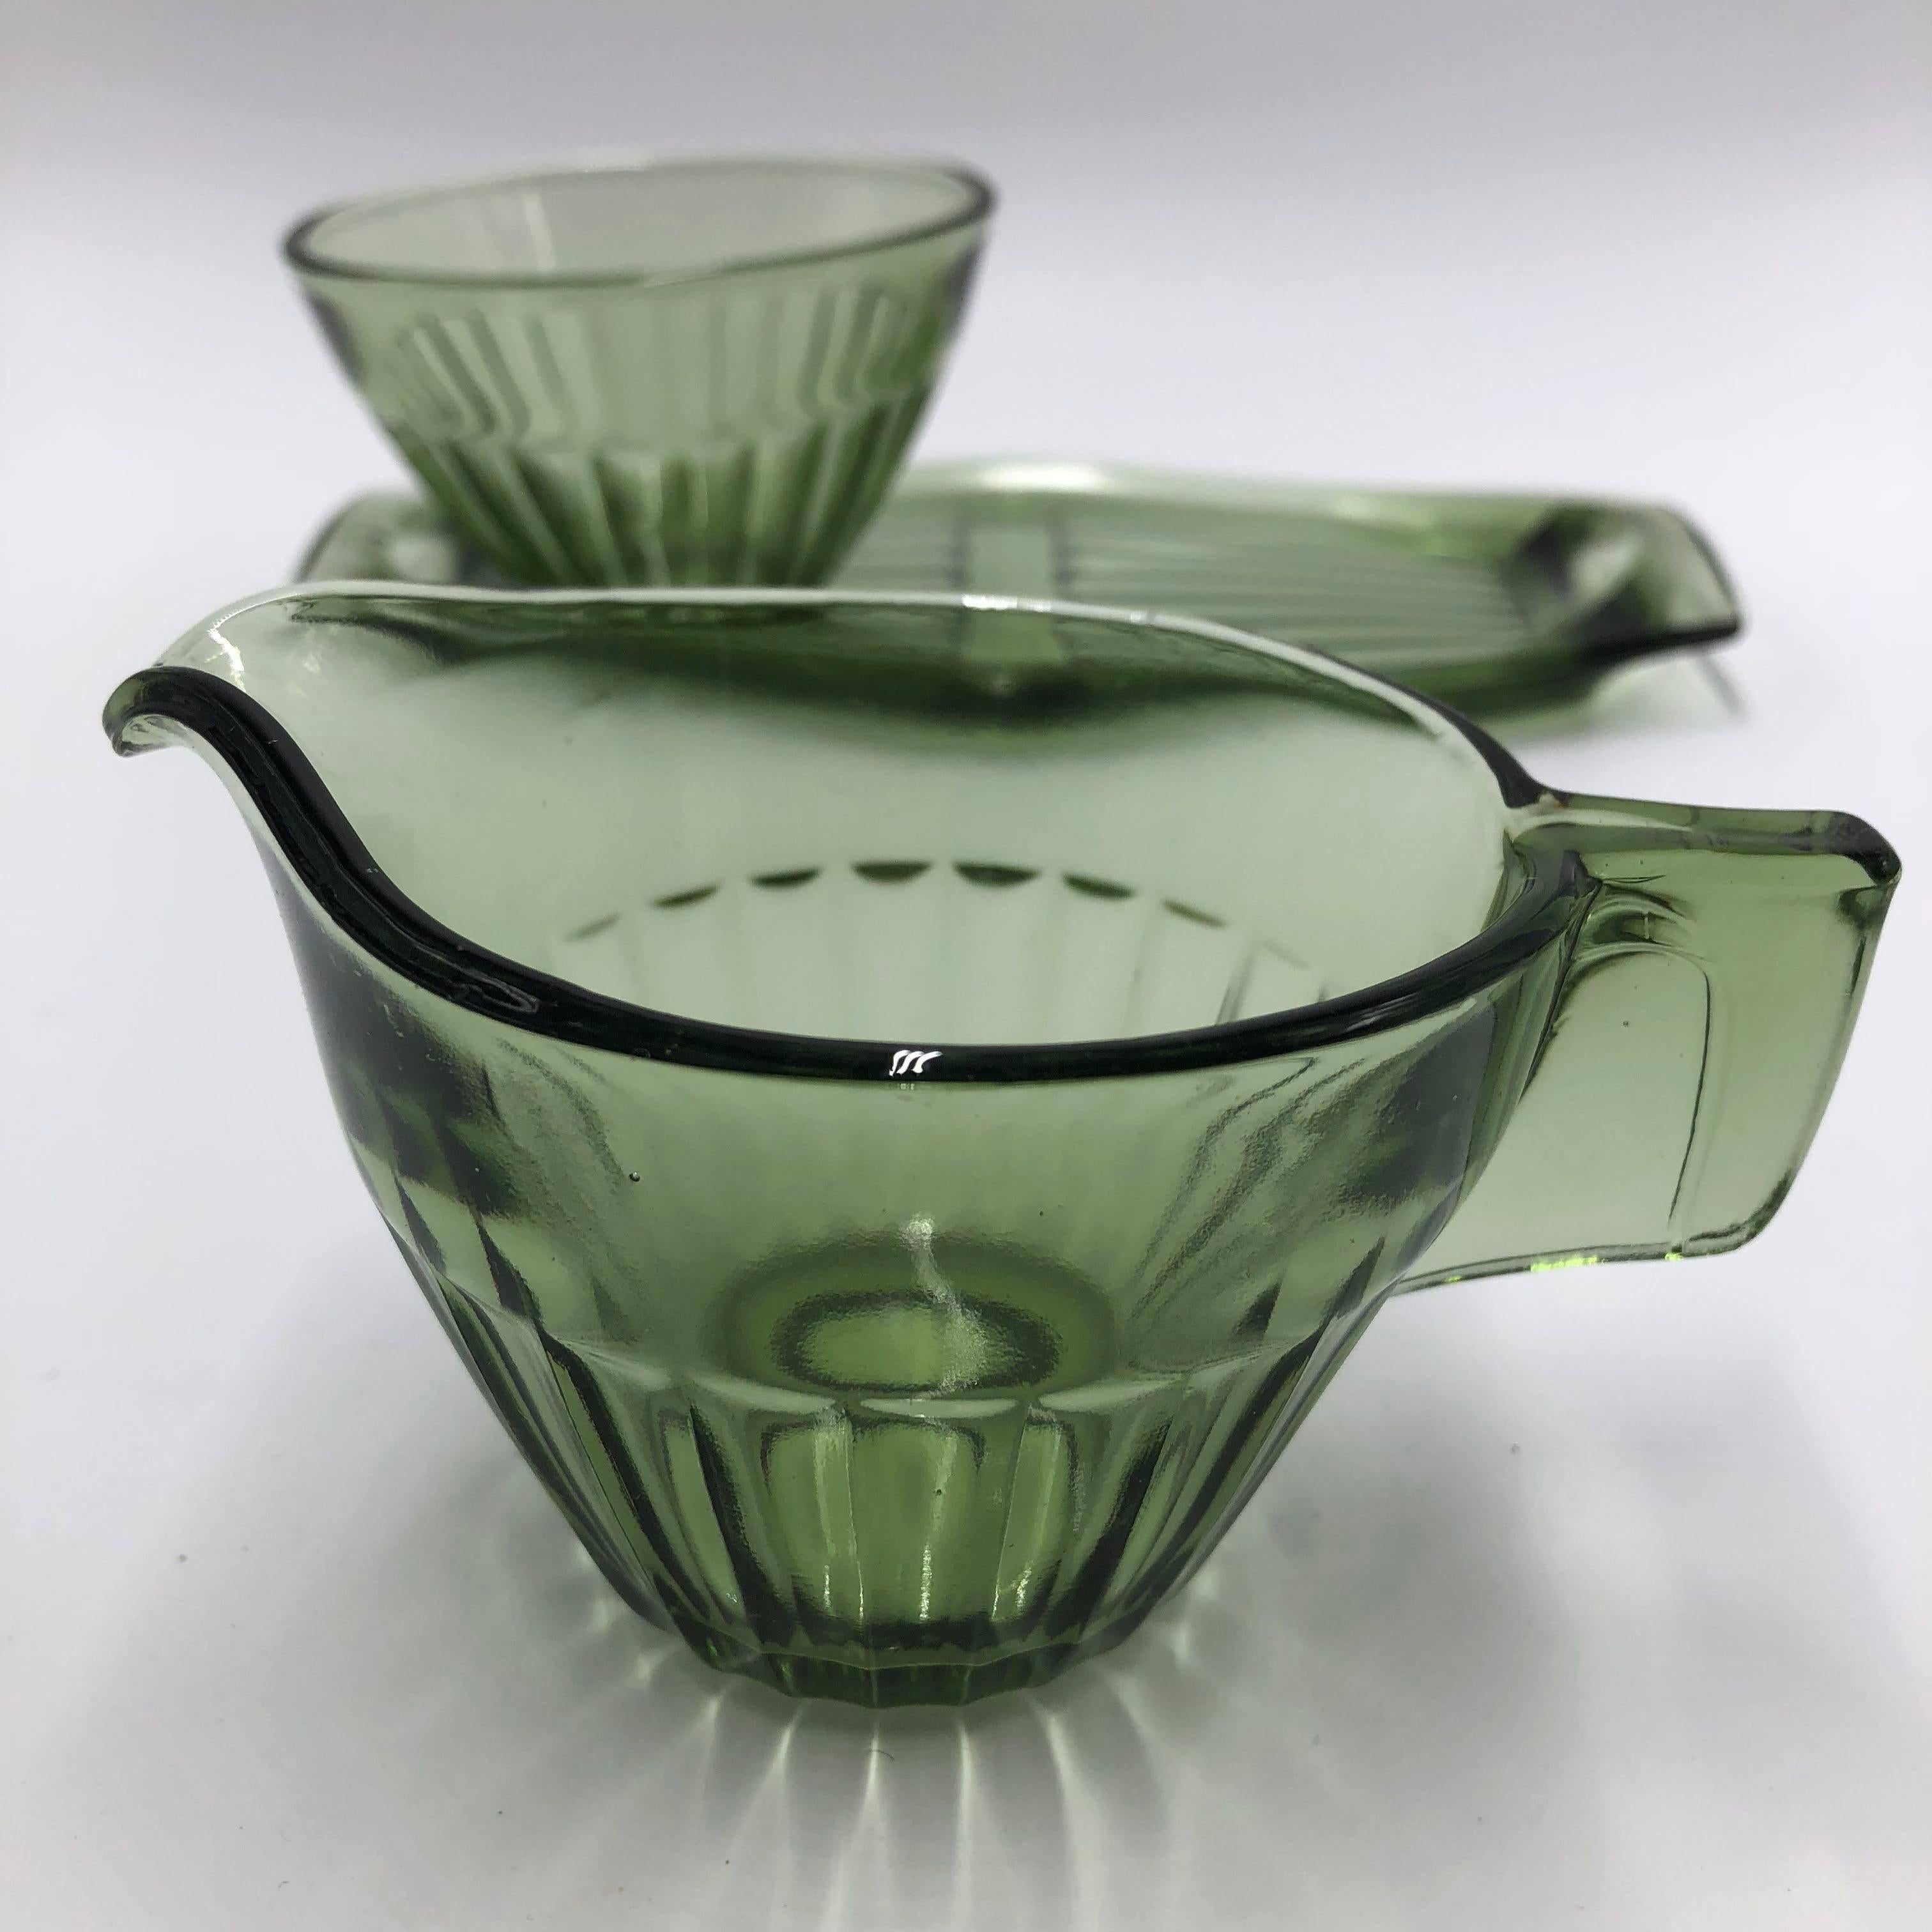 Pressed Cream and Sugar Set in Silvergreen by Copier Leerdam, 1930s For Sale